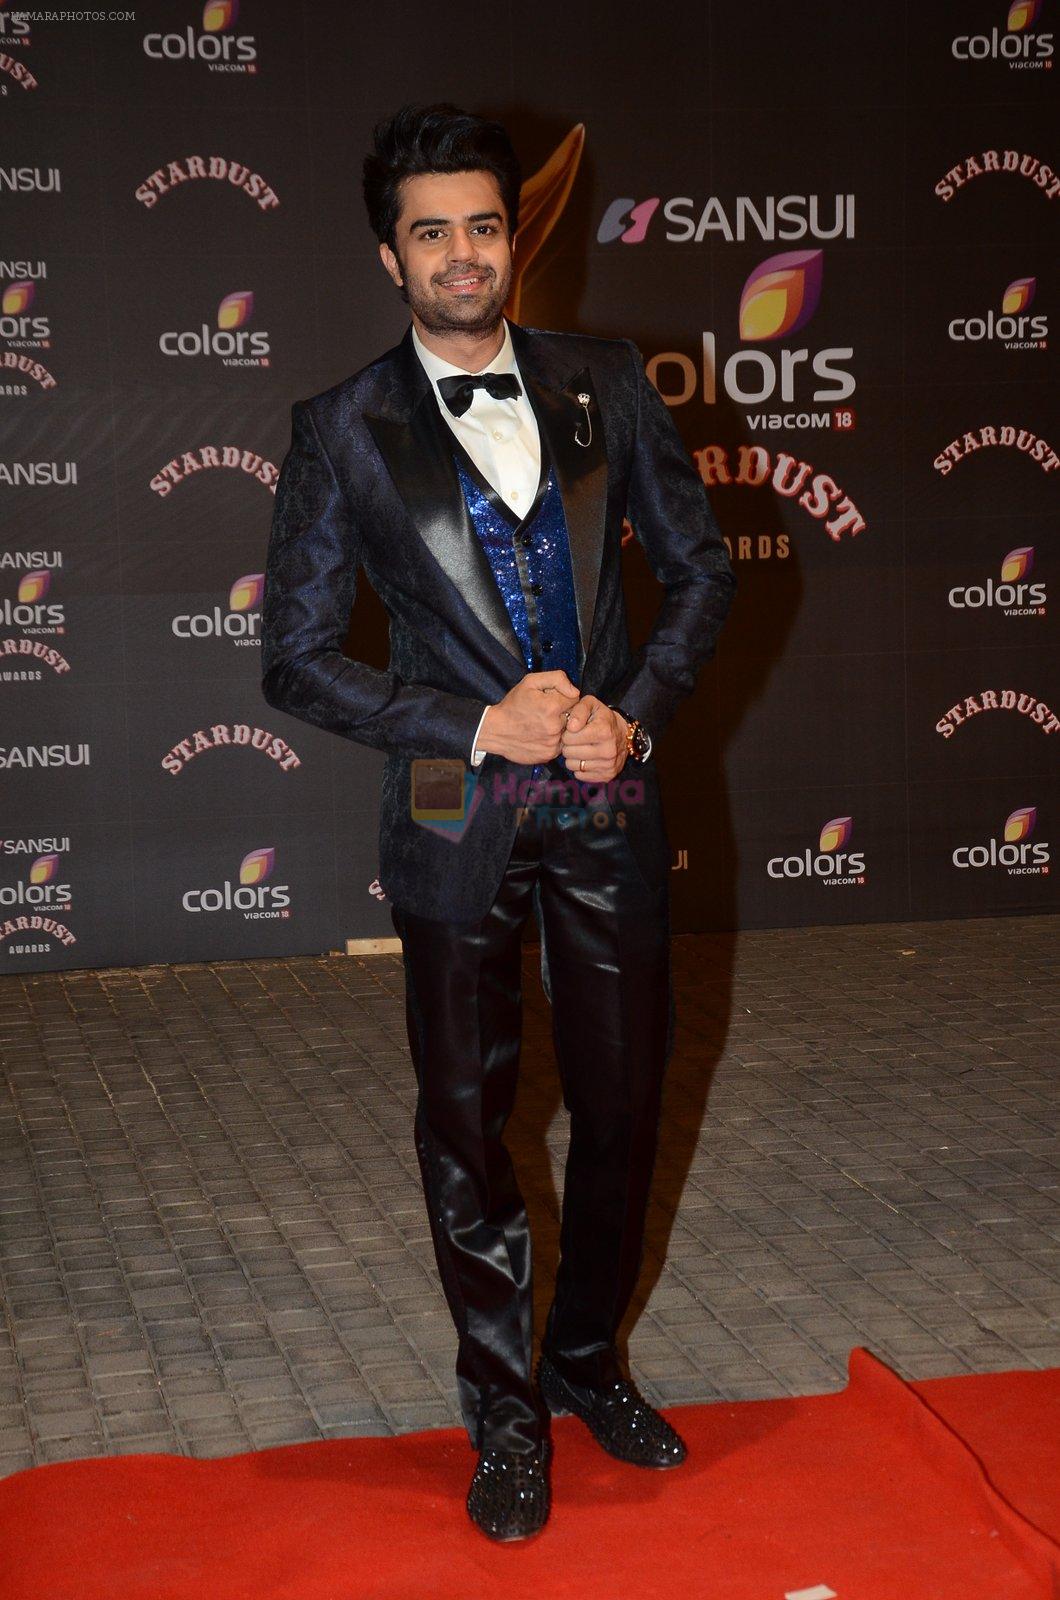 Manish Paul at the red carpet of Stardust awards on 21st Dec 2015